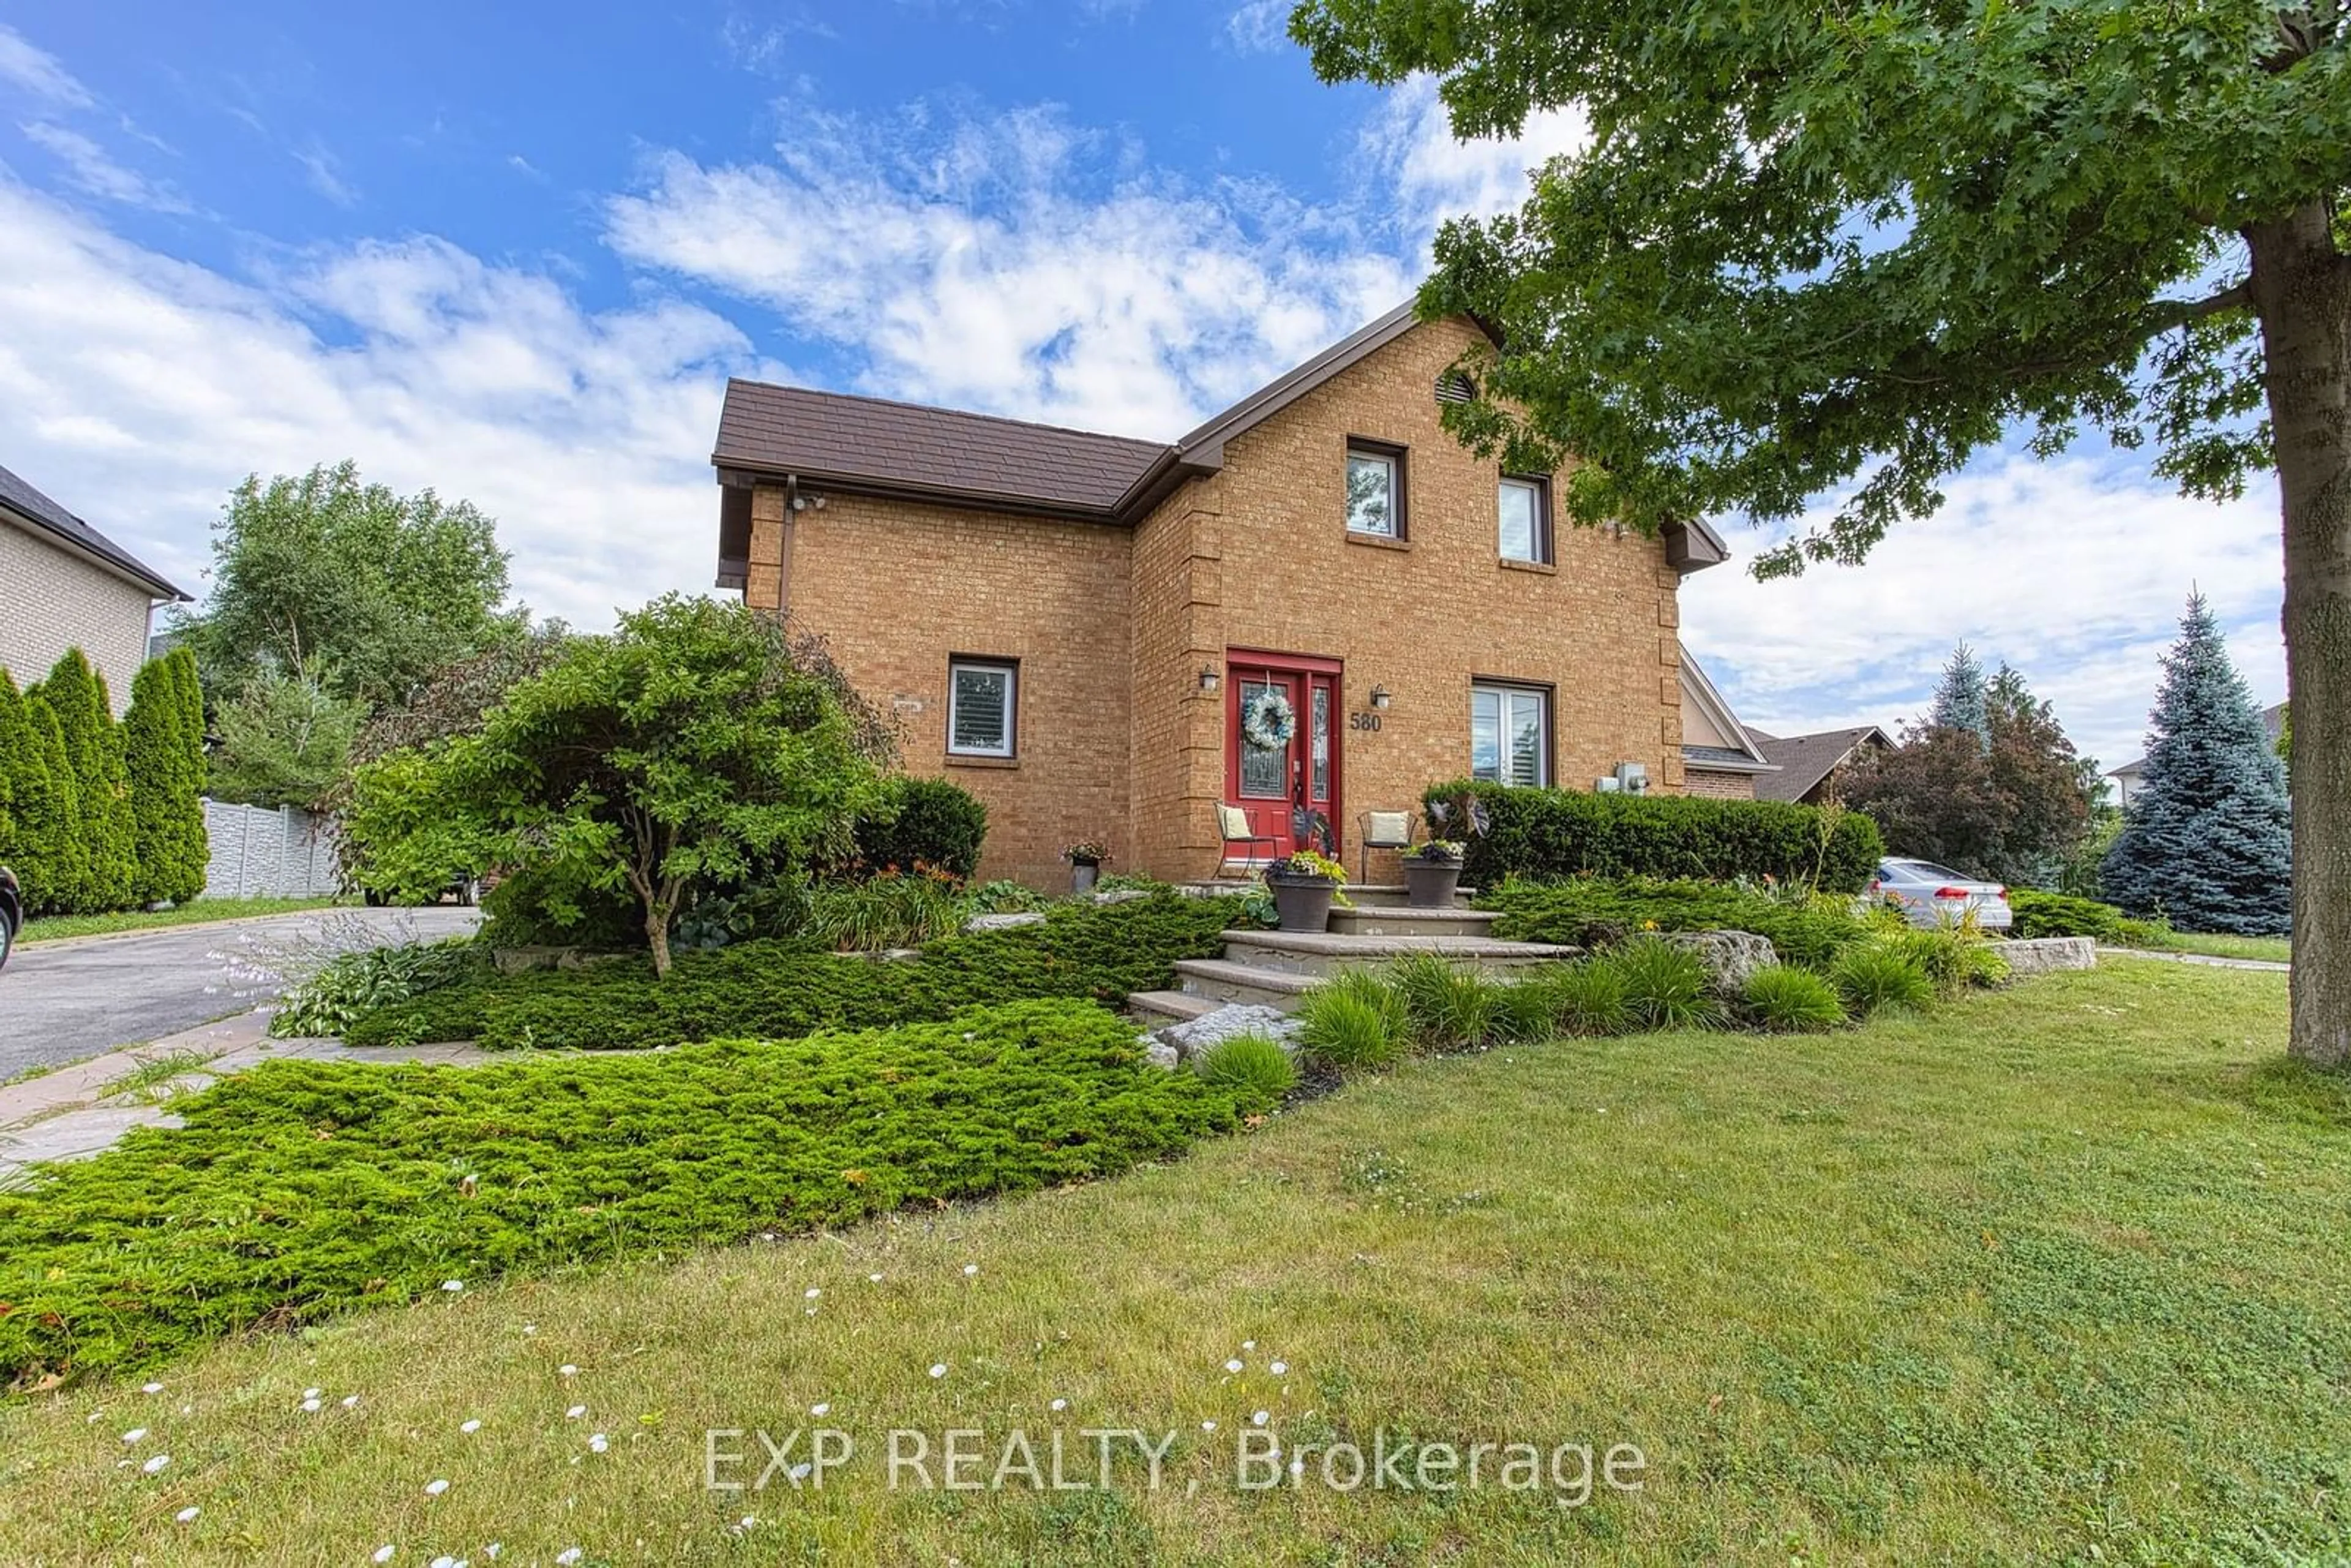 Frontside or backside of a home for 580 Fifty Rd, Hamilton Ontario L8E 5T5